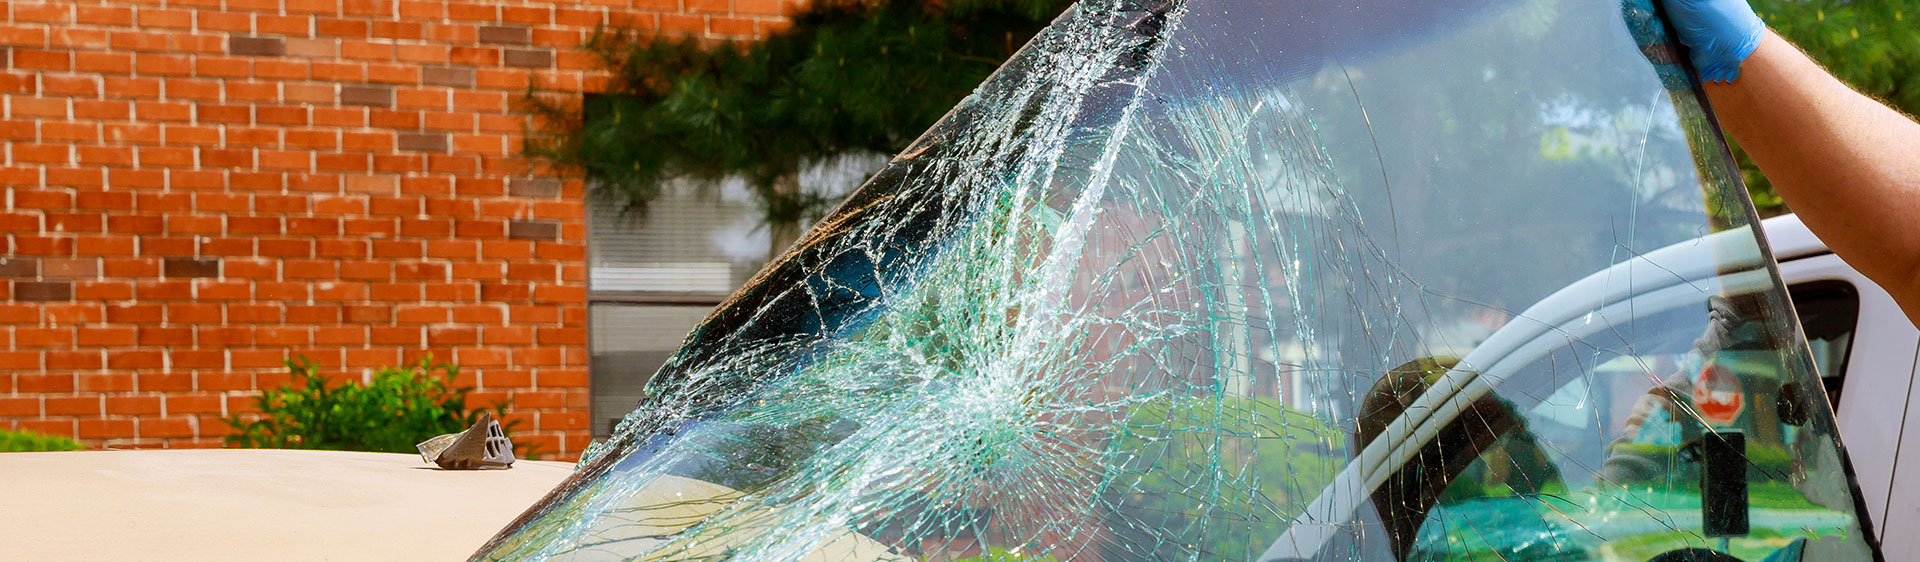 Temecula Windshield Repair, Windshield Replacement and Auto Glass Repair